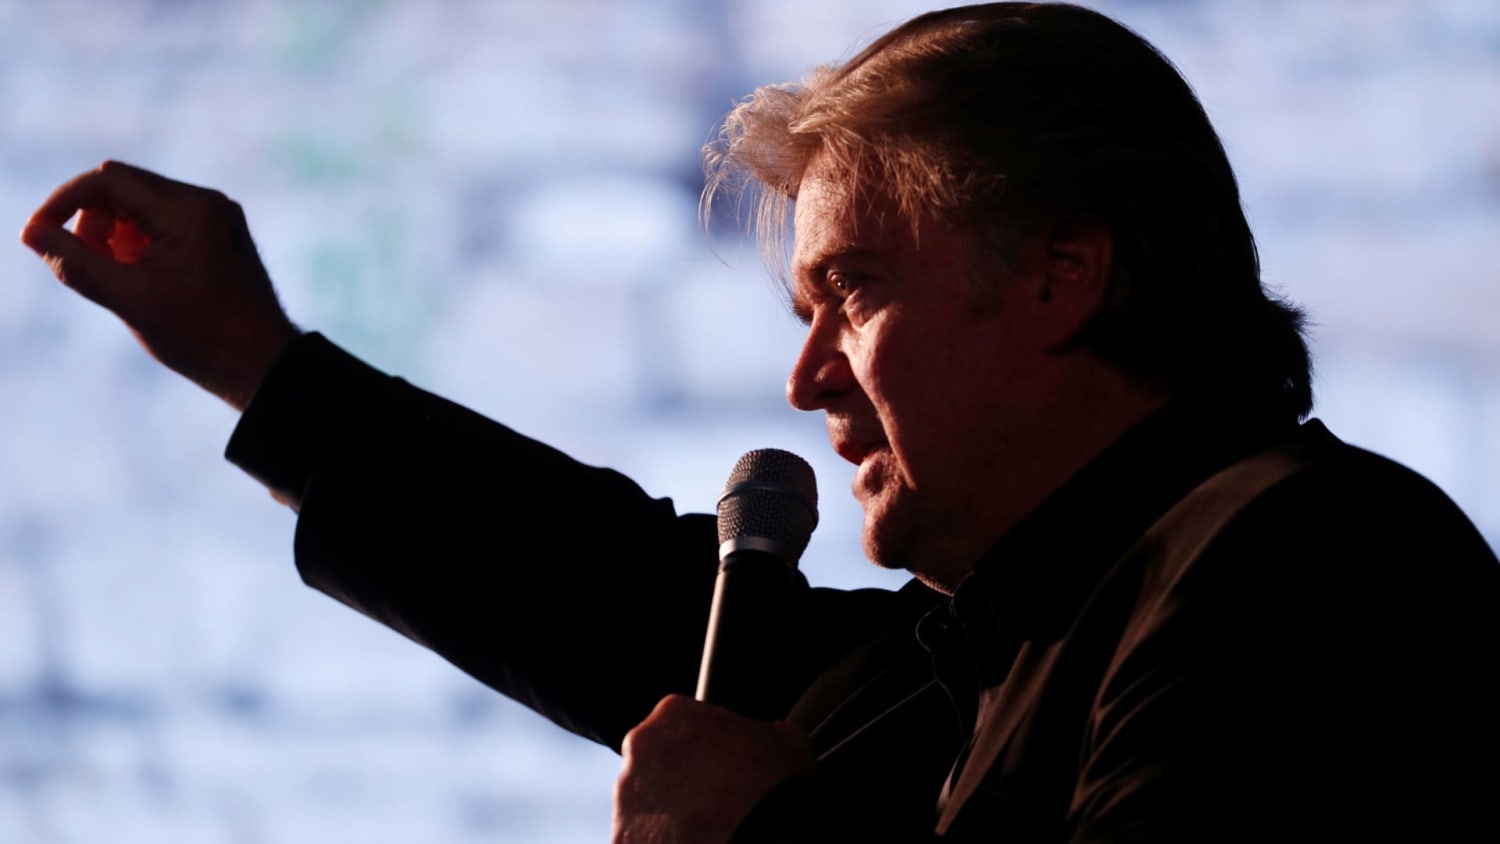 Bannon on 2020 race: 'Trump is a closer' but his reelection 'is not in the bag'